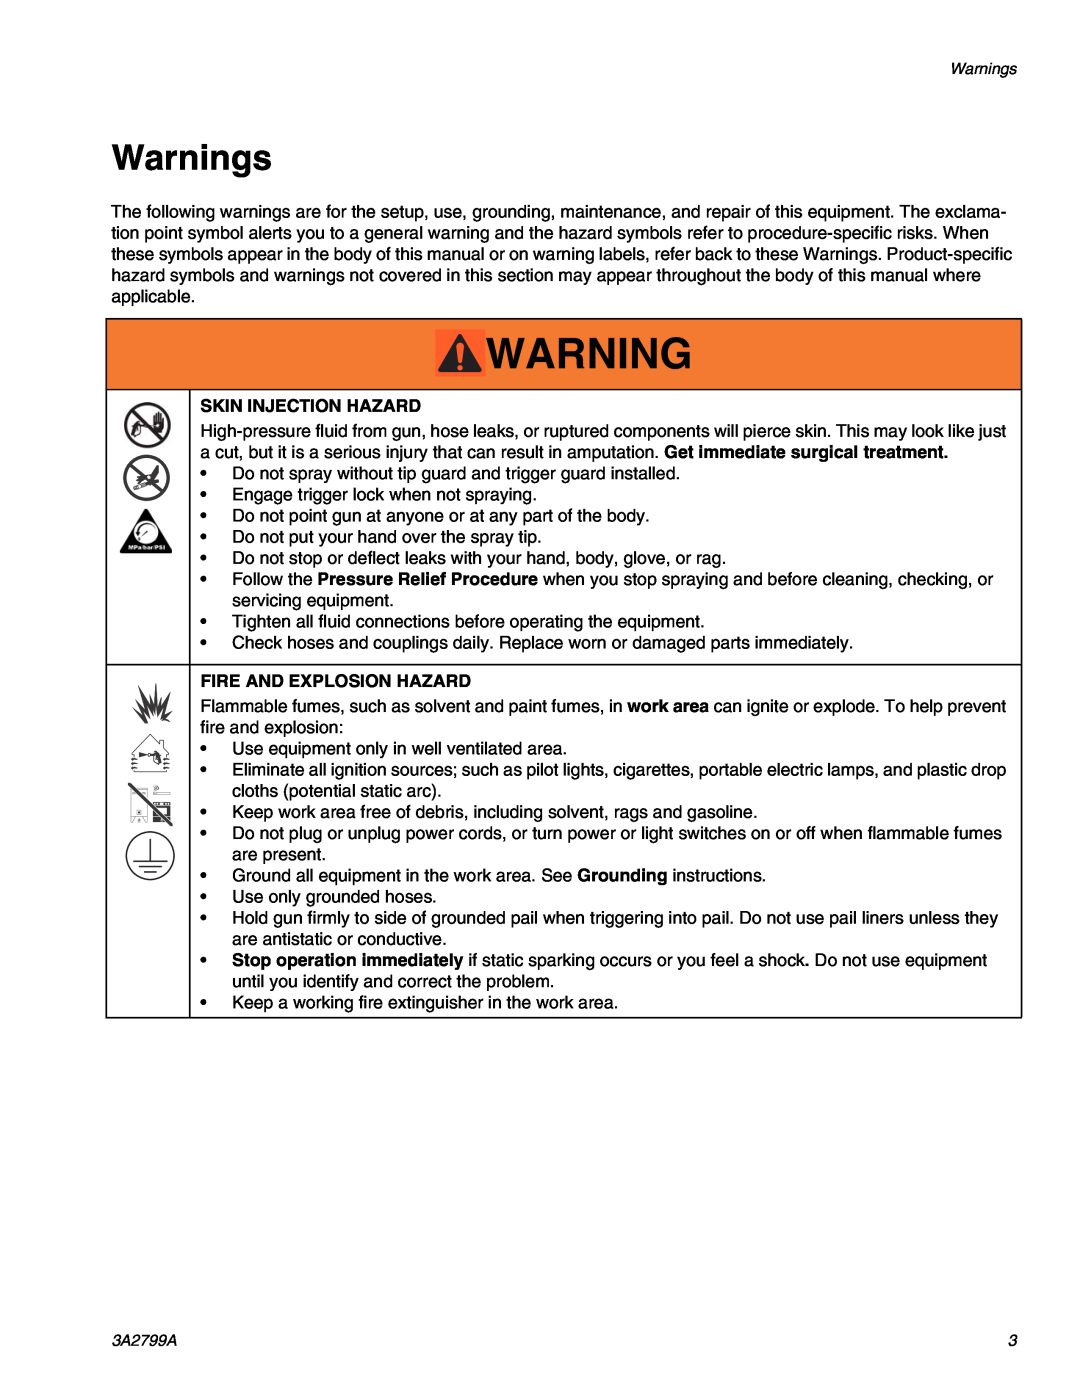 Graco 262854, Series A important safety instructions Warnings, Skin Injection Hazard, Fire And Explosion Hazard 